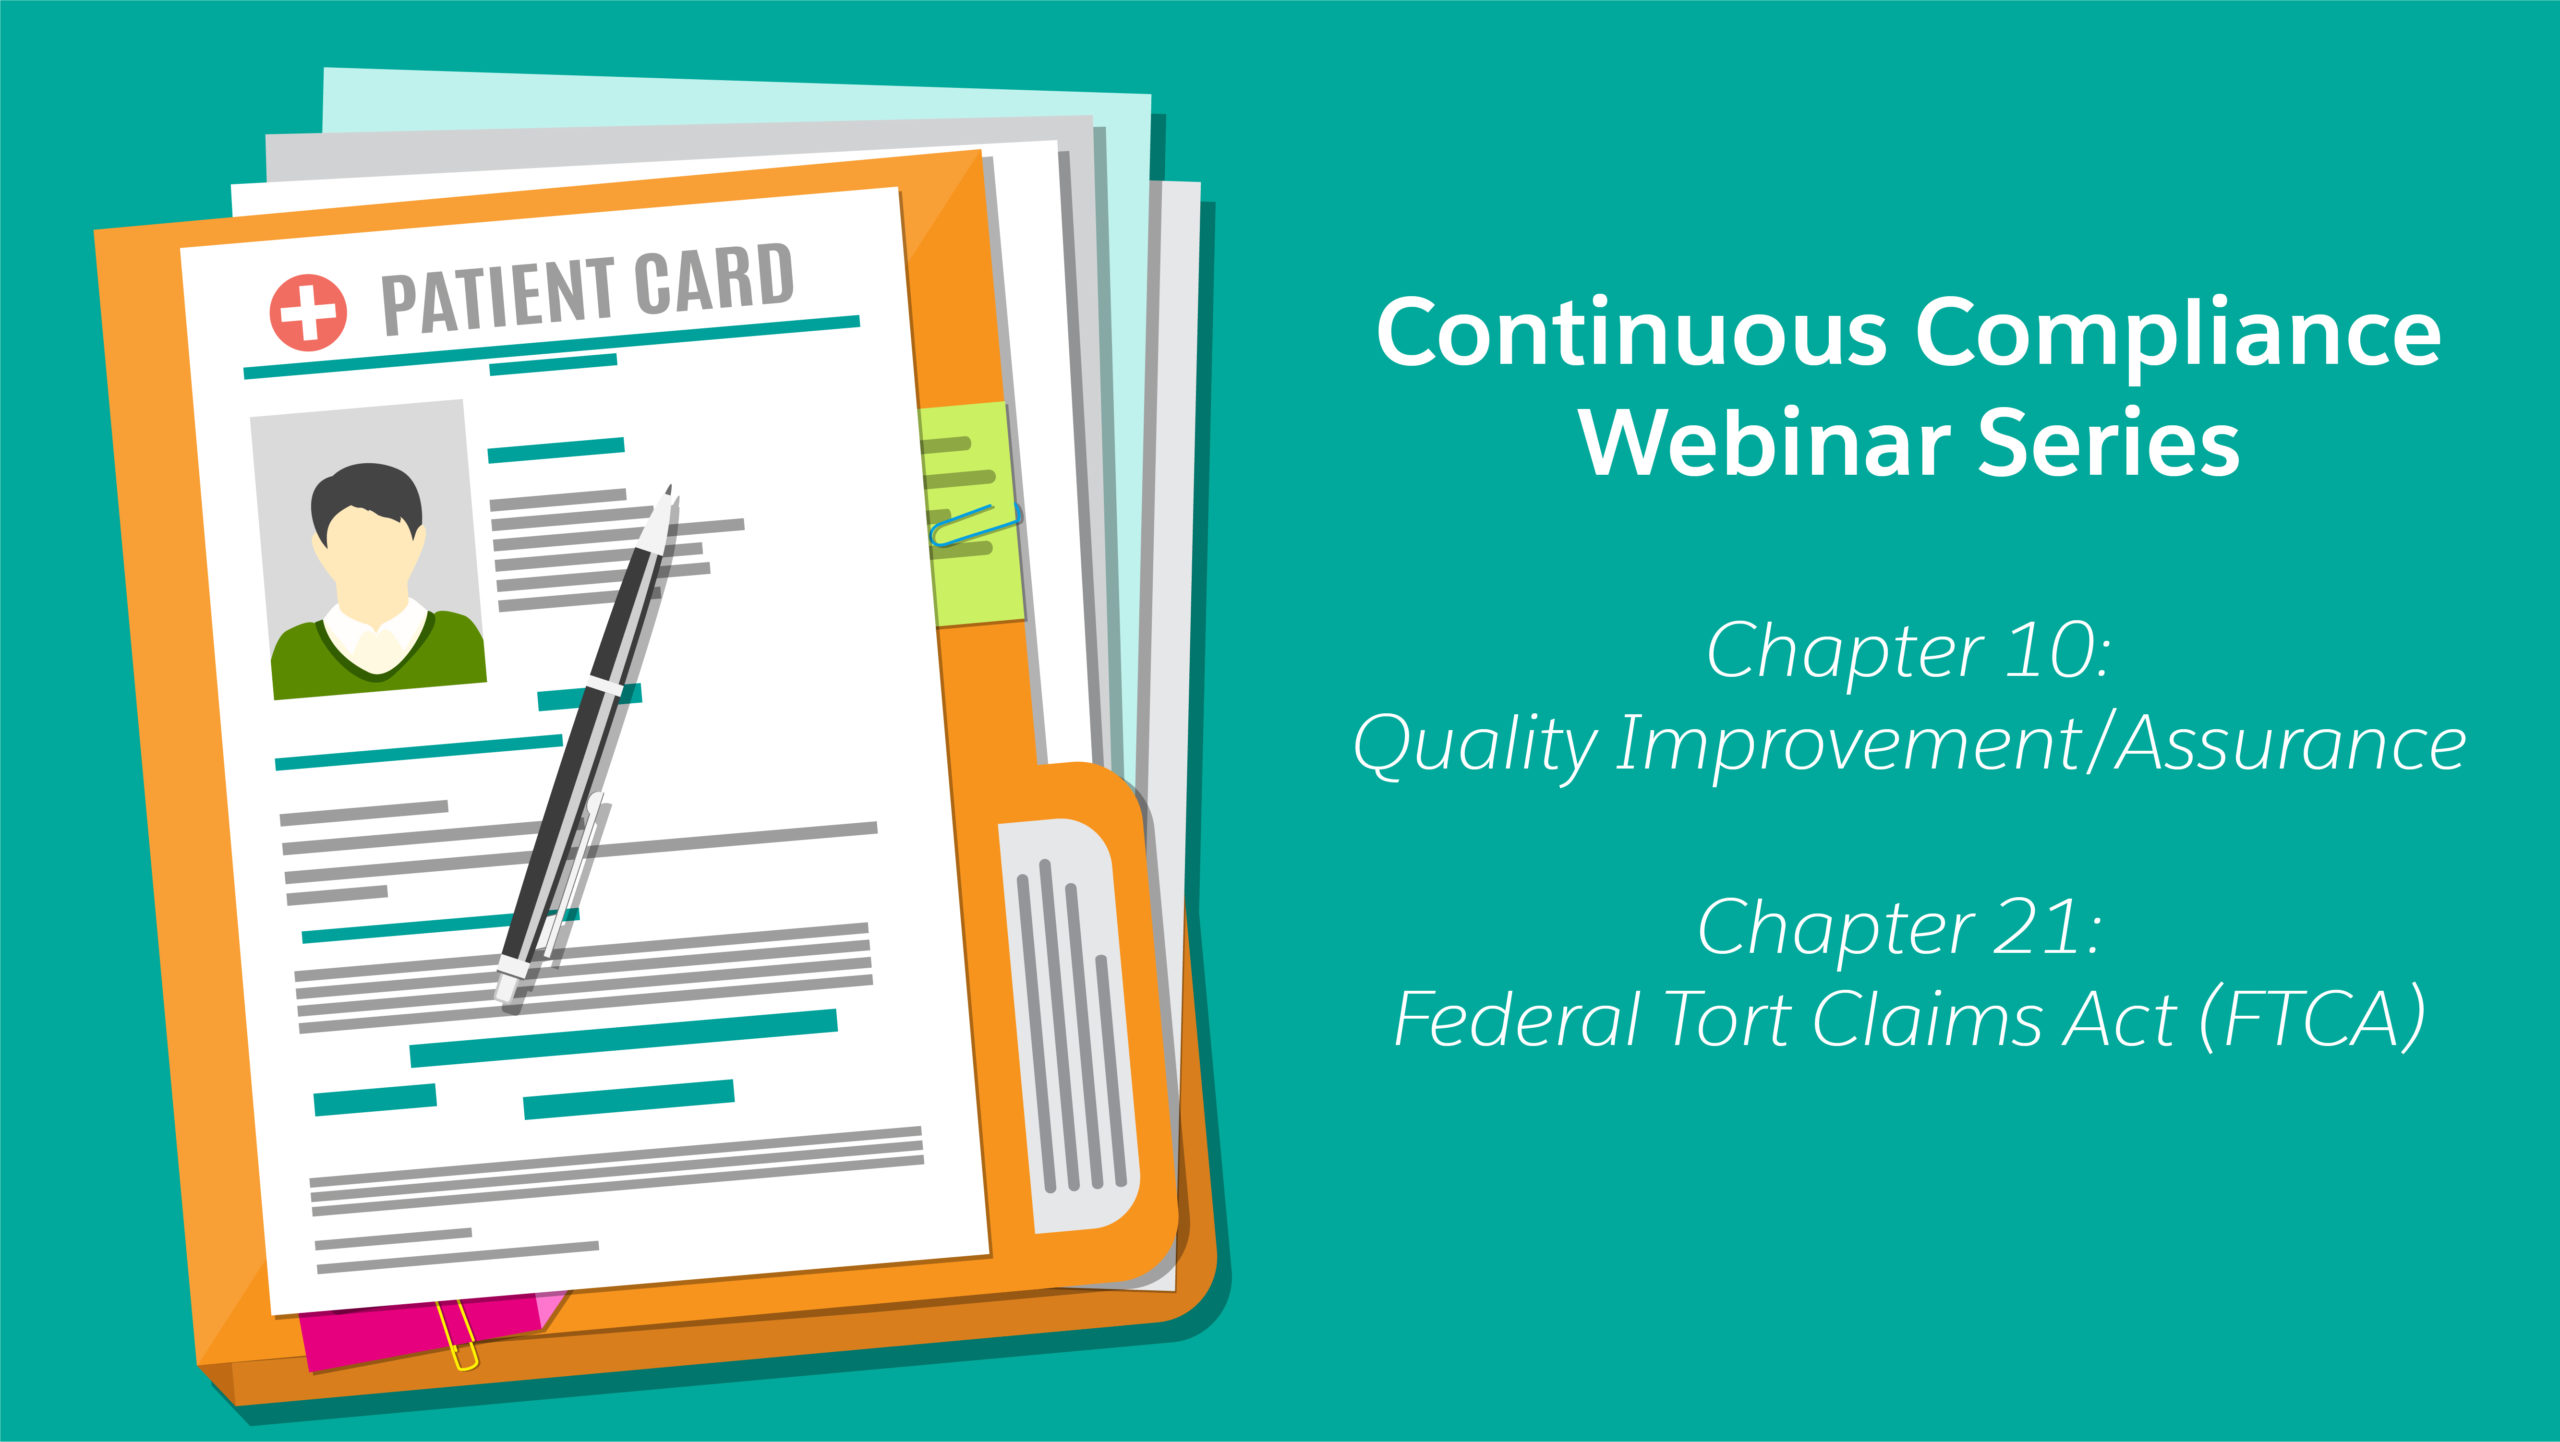 Continuous Compliance Chapter 10 and 21